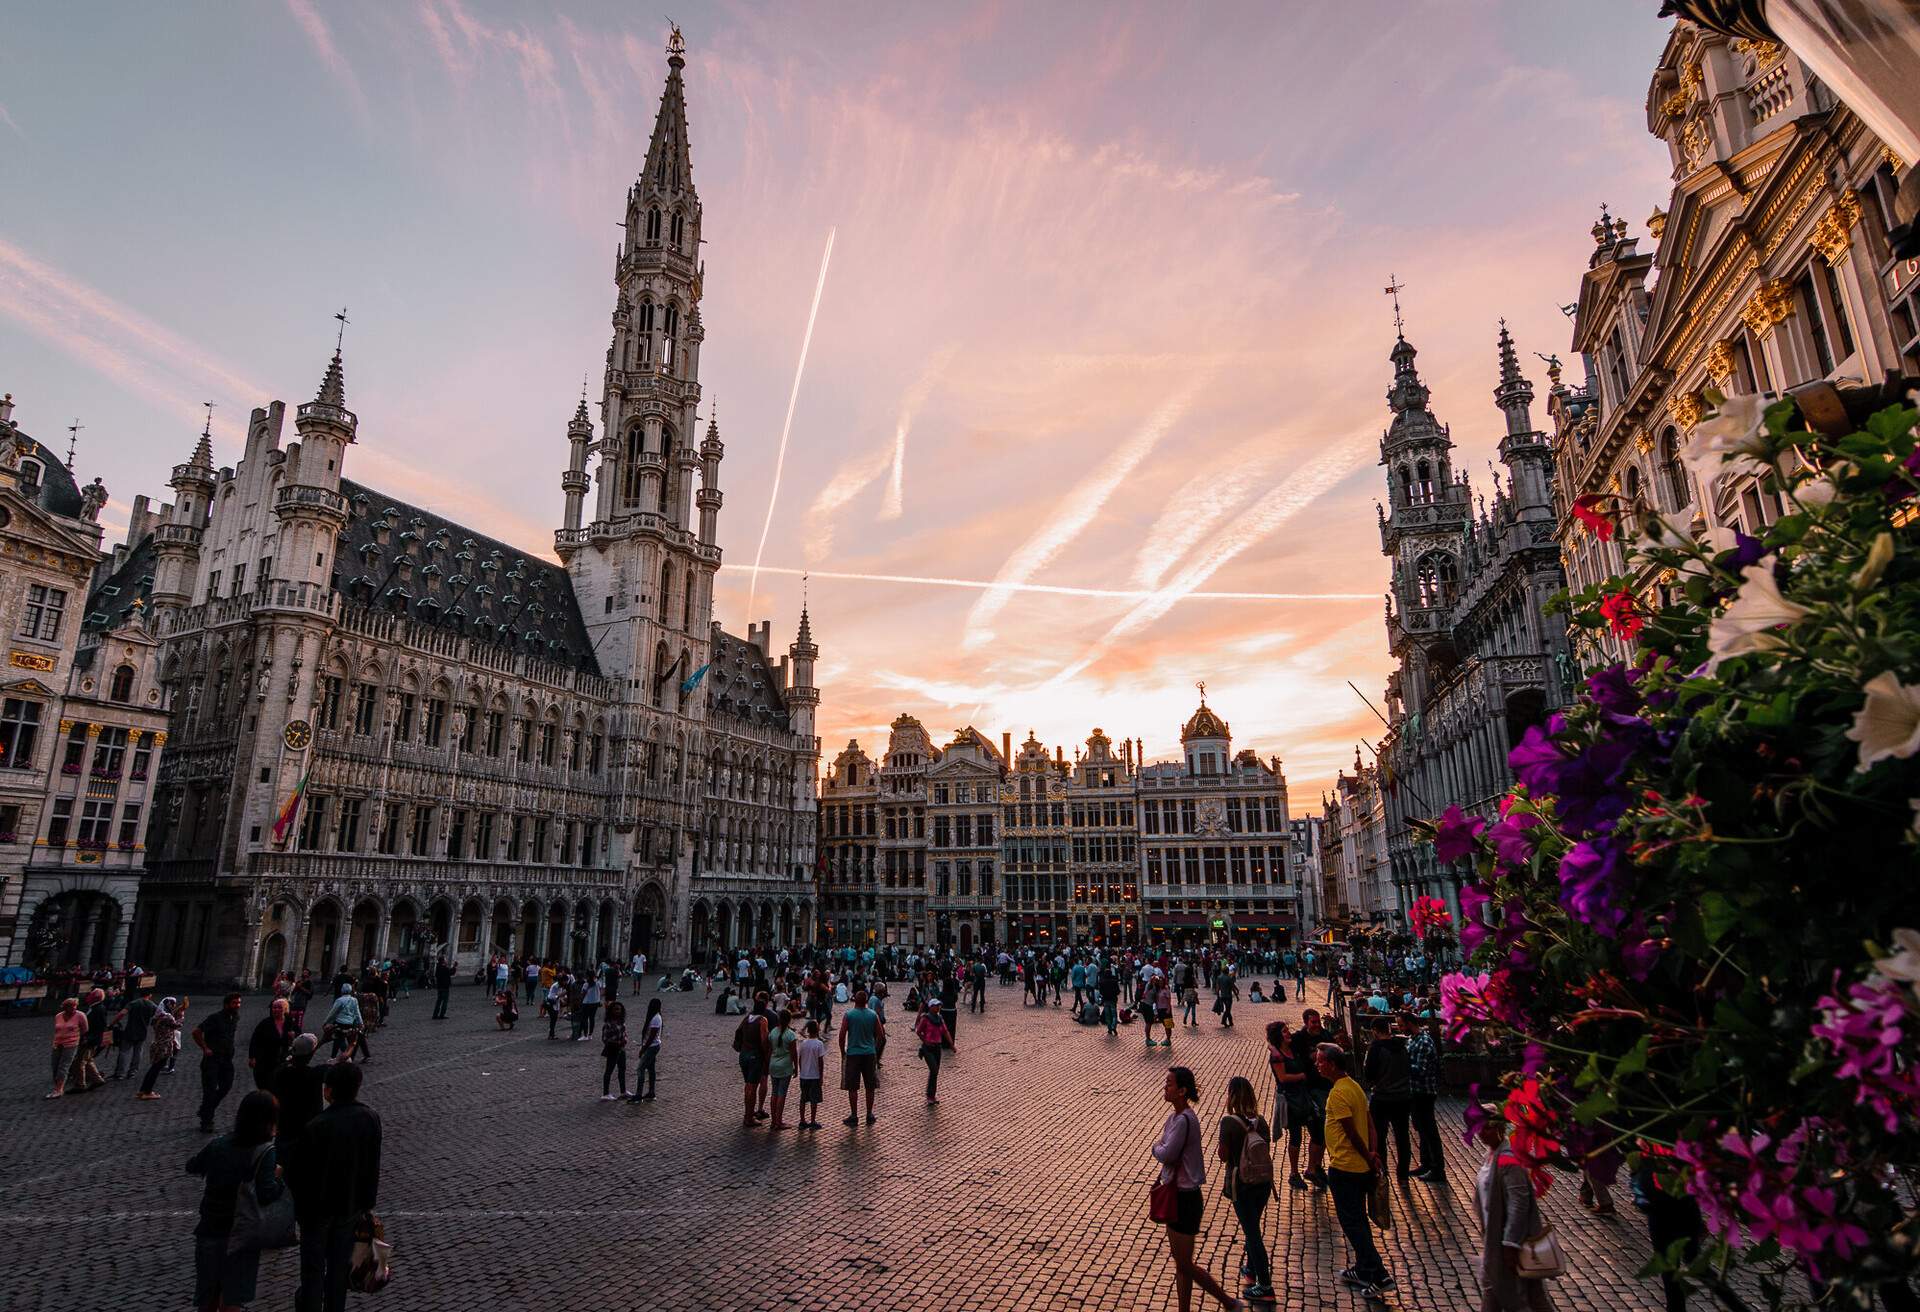 DEST_BELGIUM_BRUSSELS_GRAND_PLACE_PEOPLE_GettyImages-1137269720